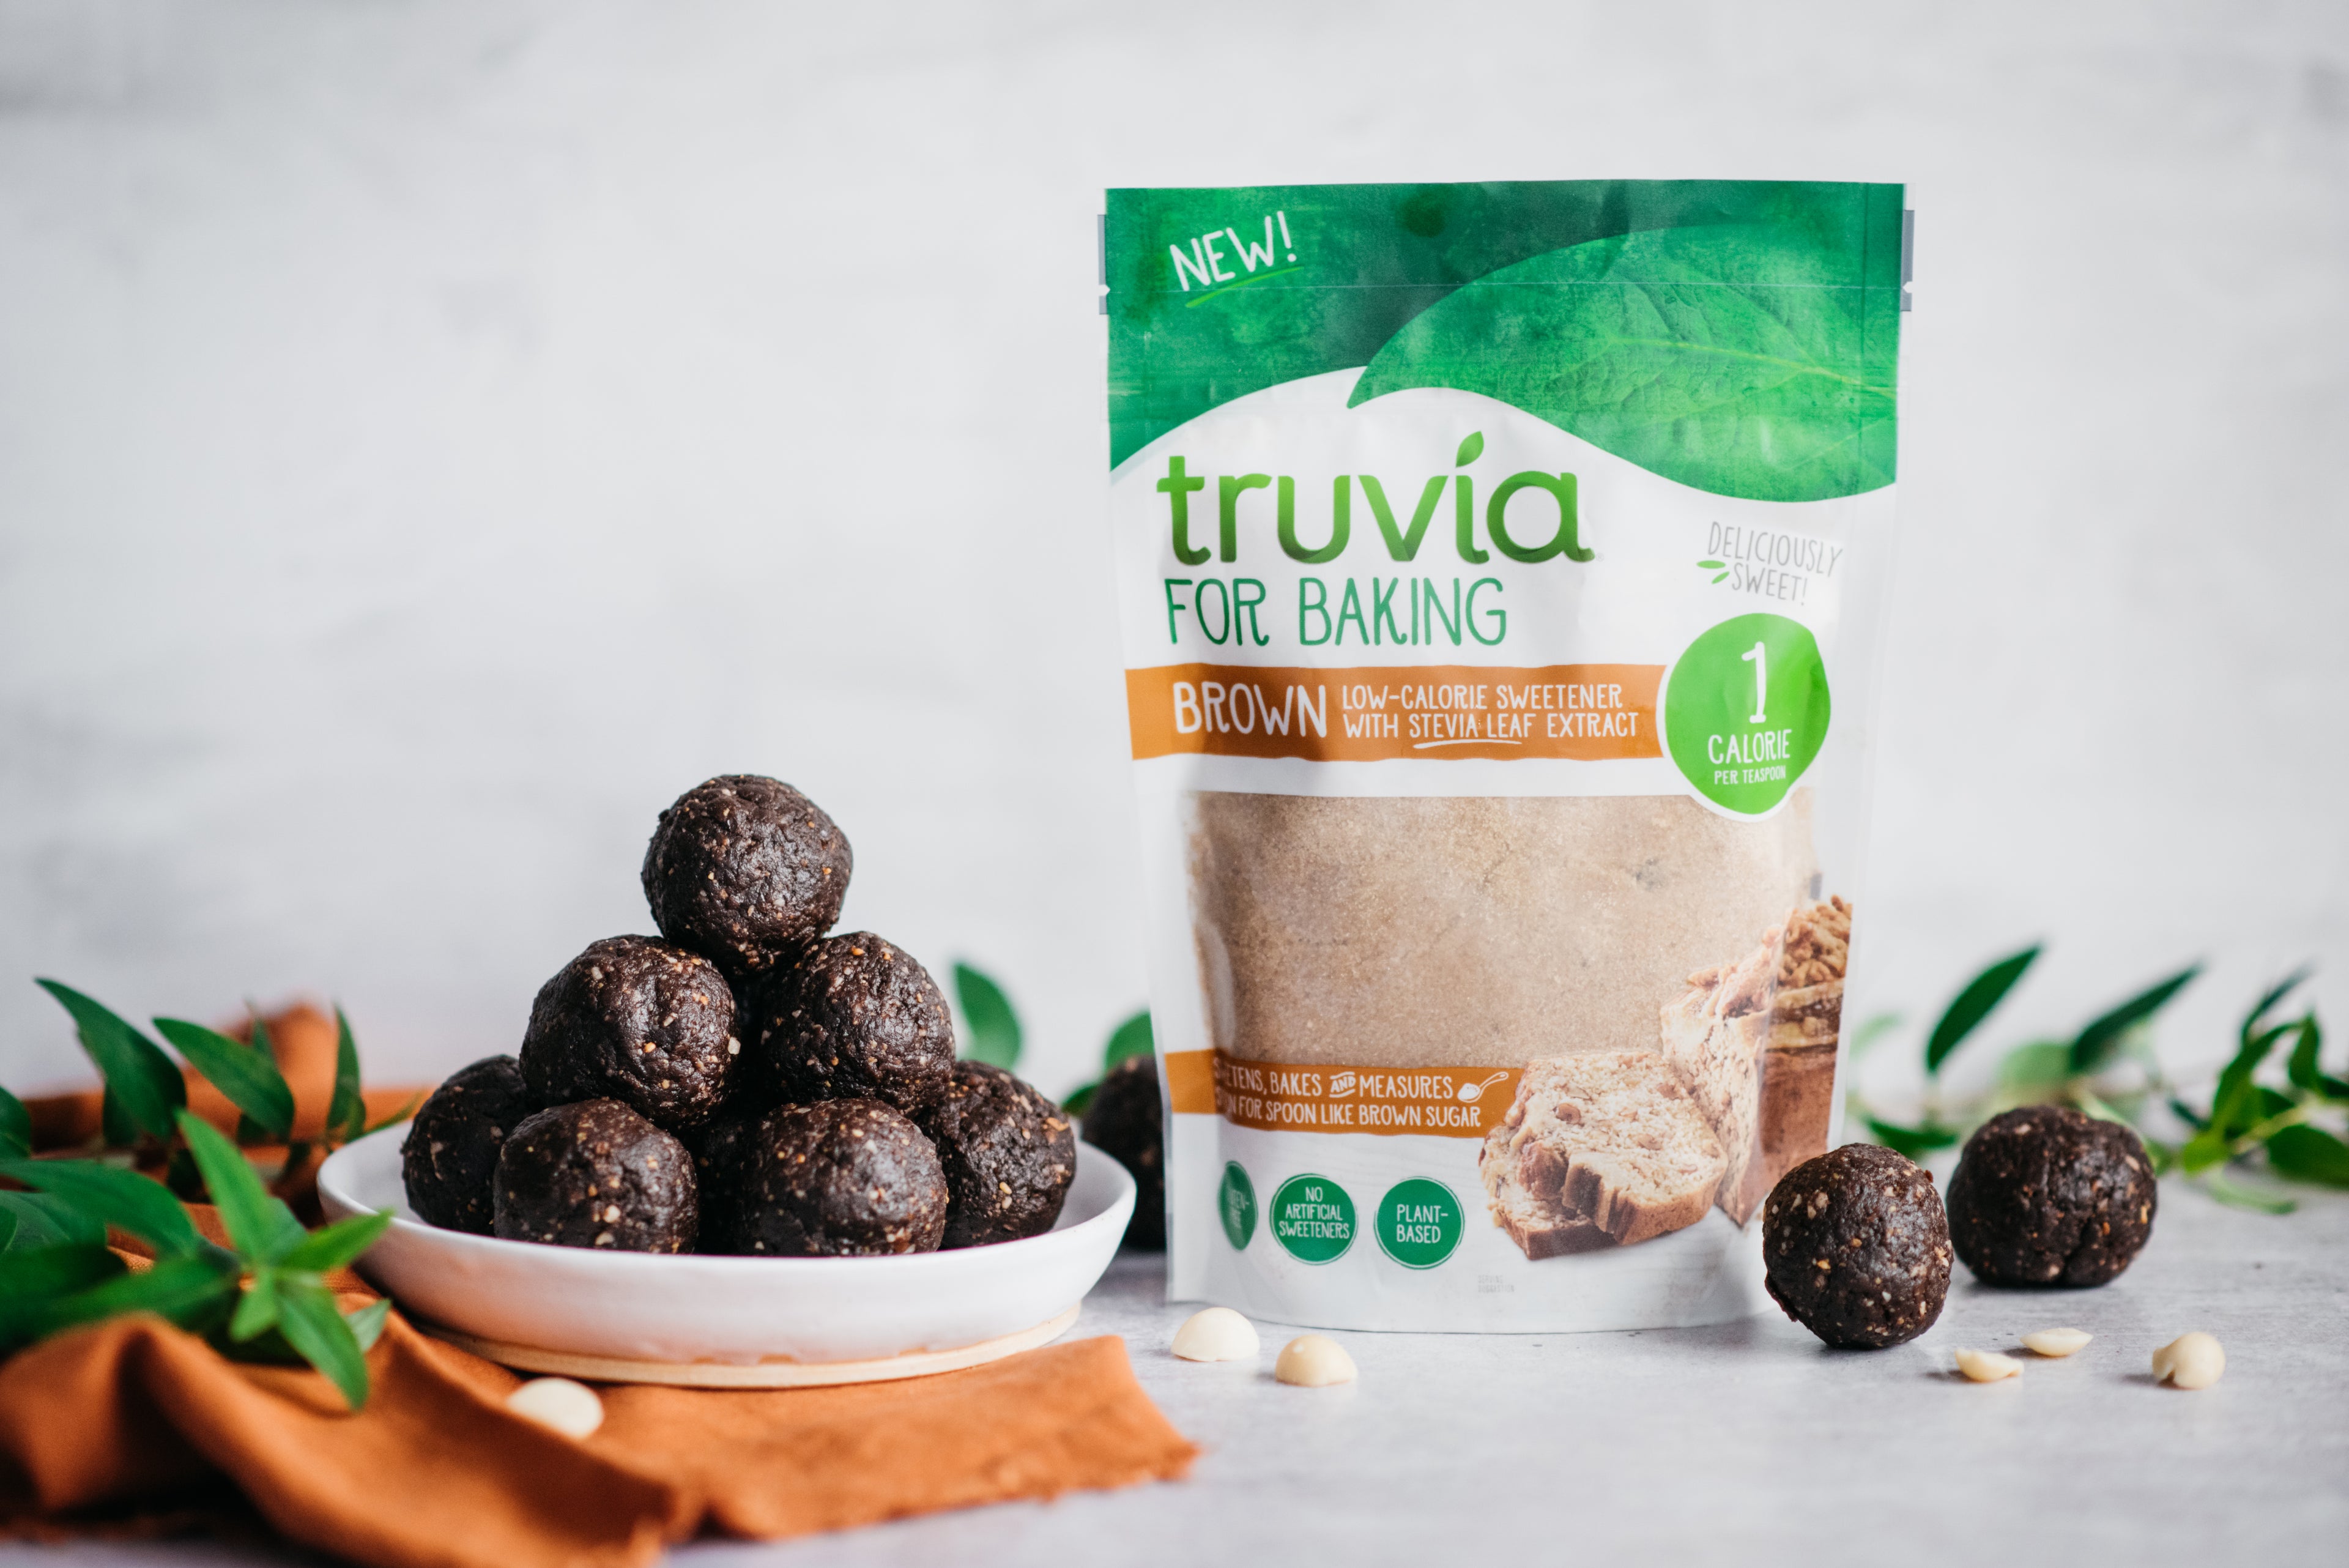 A bowl of raw energy balls next to a packet of Truvia for baking brown